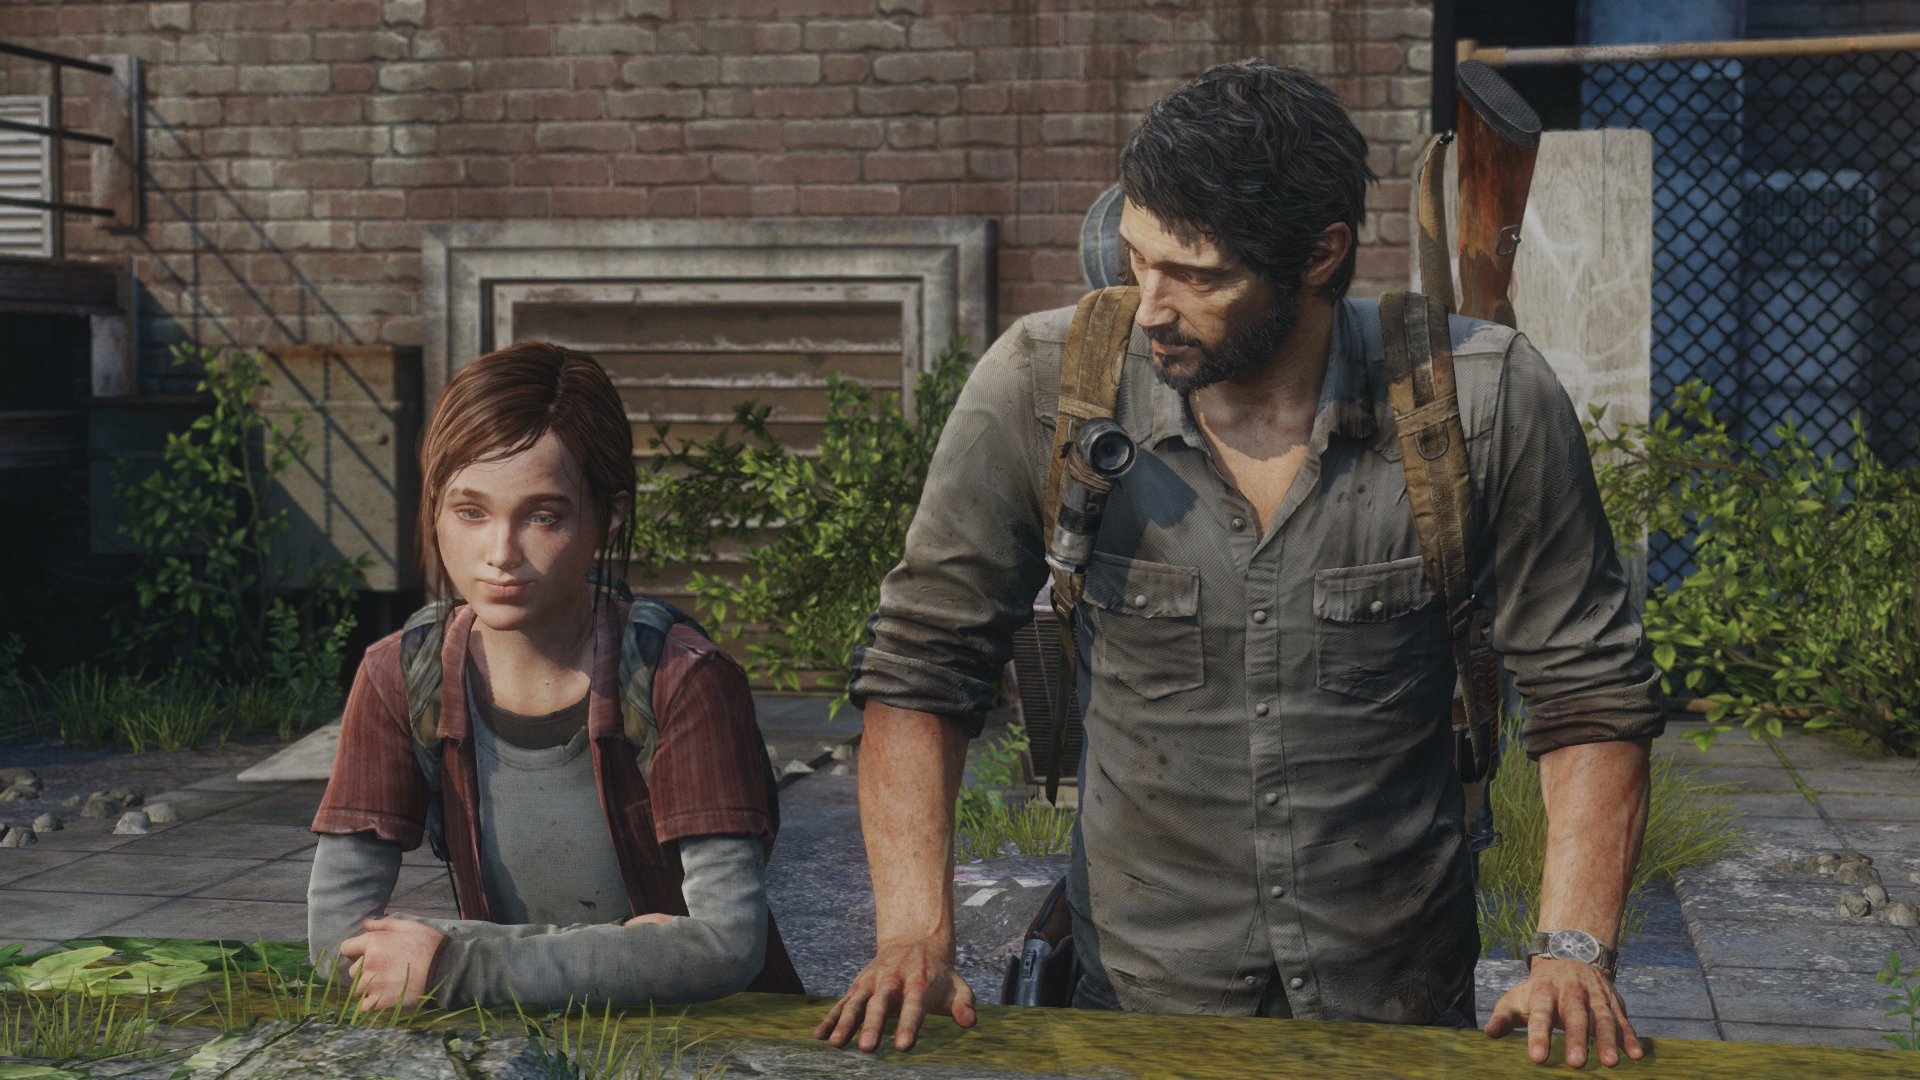 Wallpaper The Last of Us, The Last of Us Part II, Ellie, Joel, Naughty Dog,  Background - Download Free Image